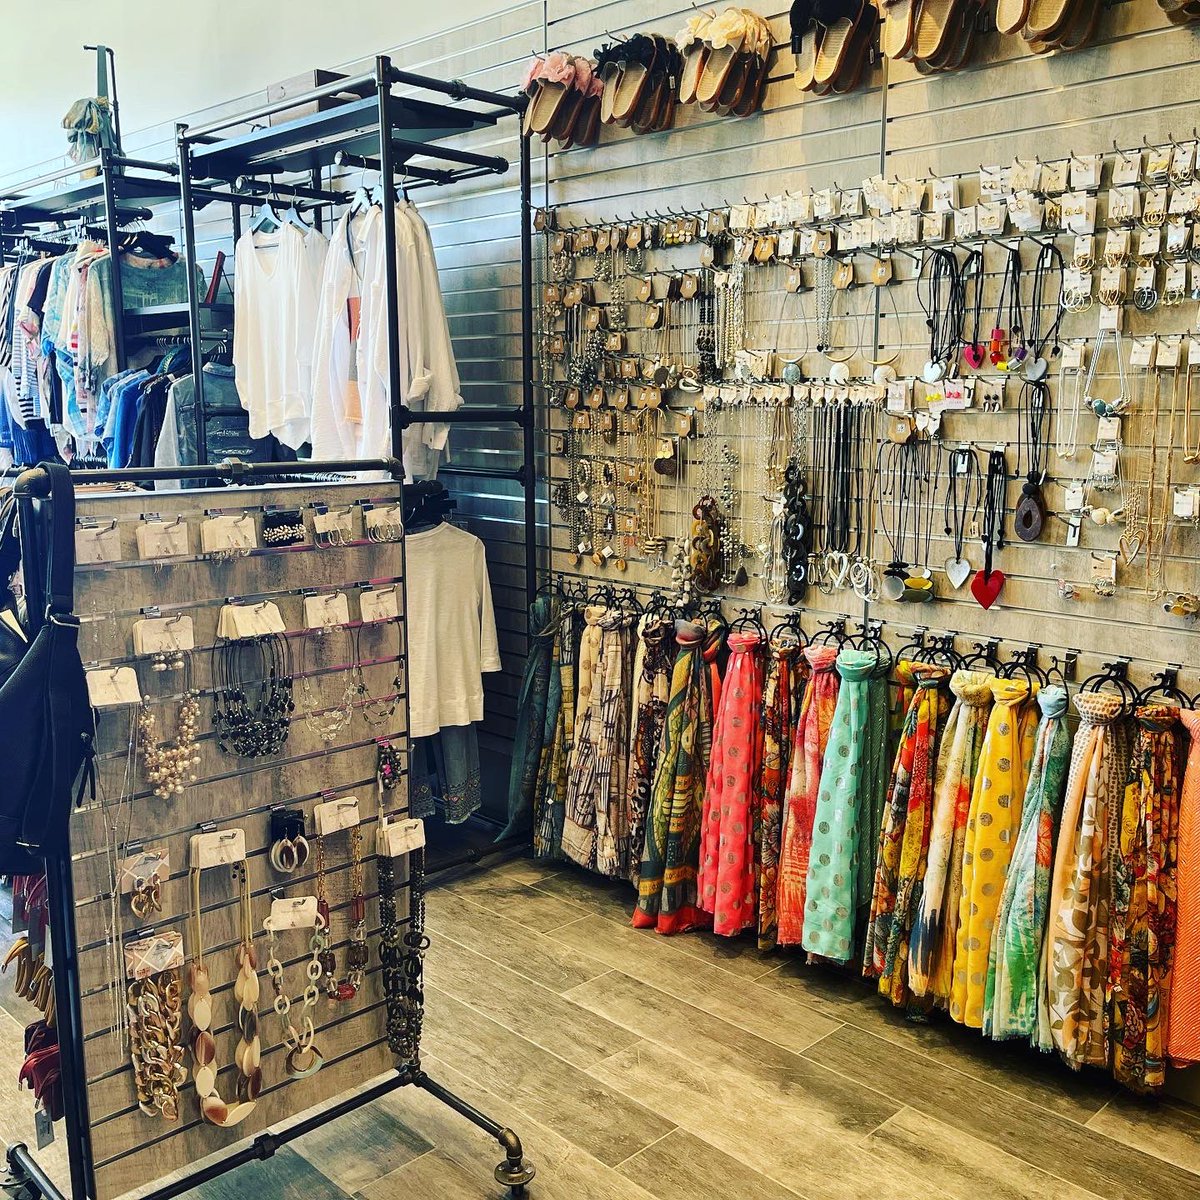 Welcome to #PelhamOn Village Boutique! Congratulations to this #NiagaraLocal business on opening a second location in #Fonthill featuring fashion pieces, casual wear and unique gifts. There’s something for everyone! Check it out. #shoplocal #shoppelham #niagaramyway